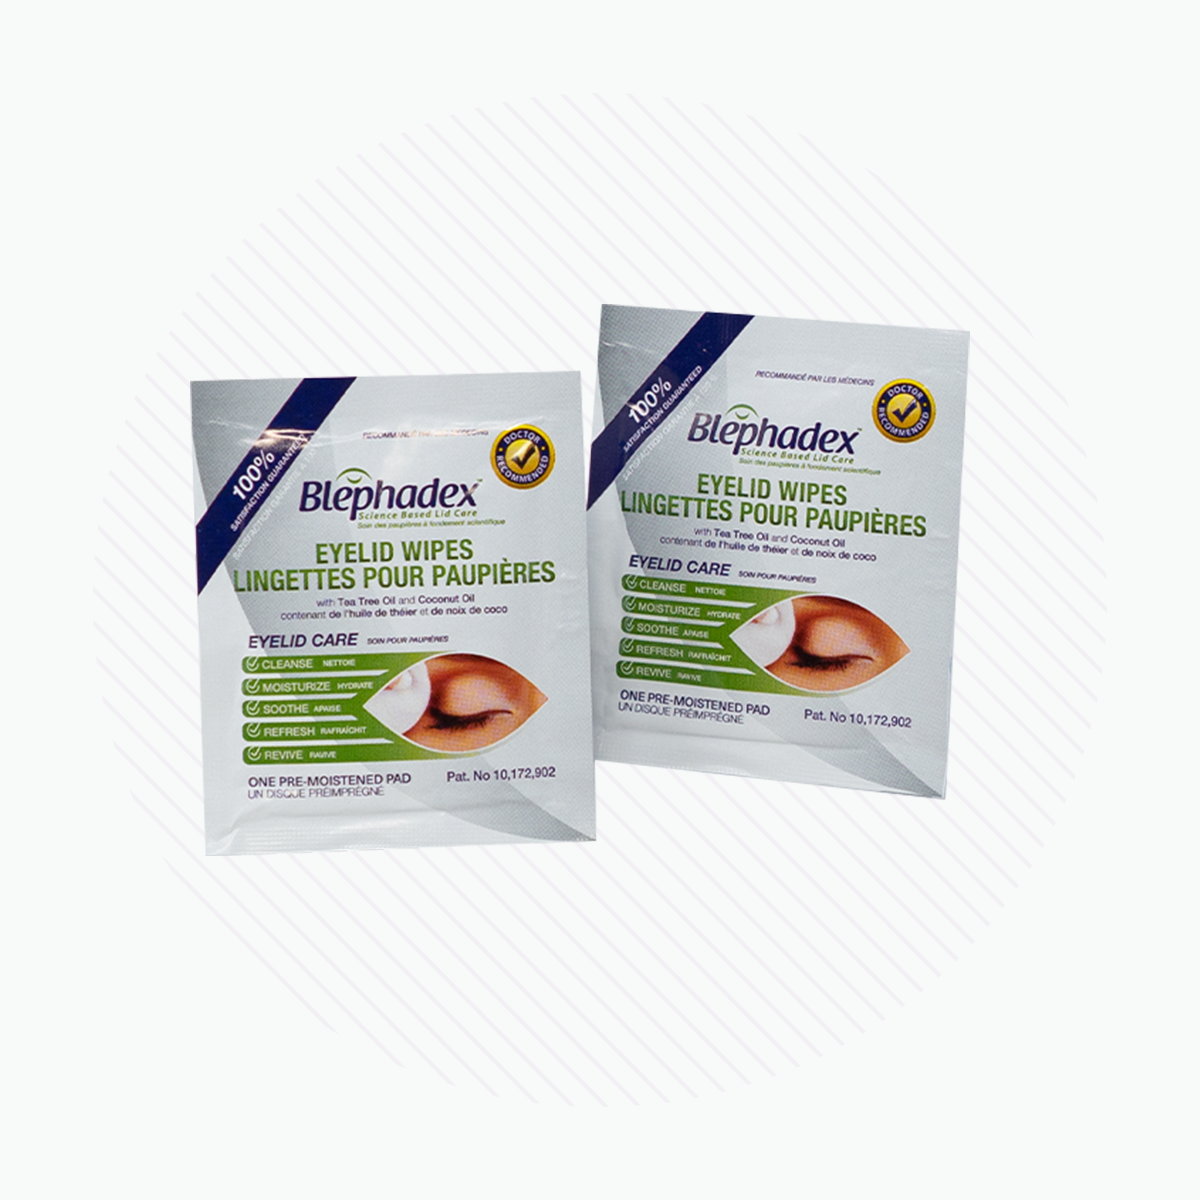 Blephadex Eyelid Wipes (2 Month Supply, 2 Boxes of 30) 2-Pack